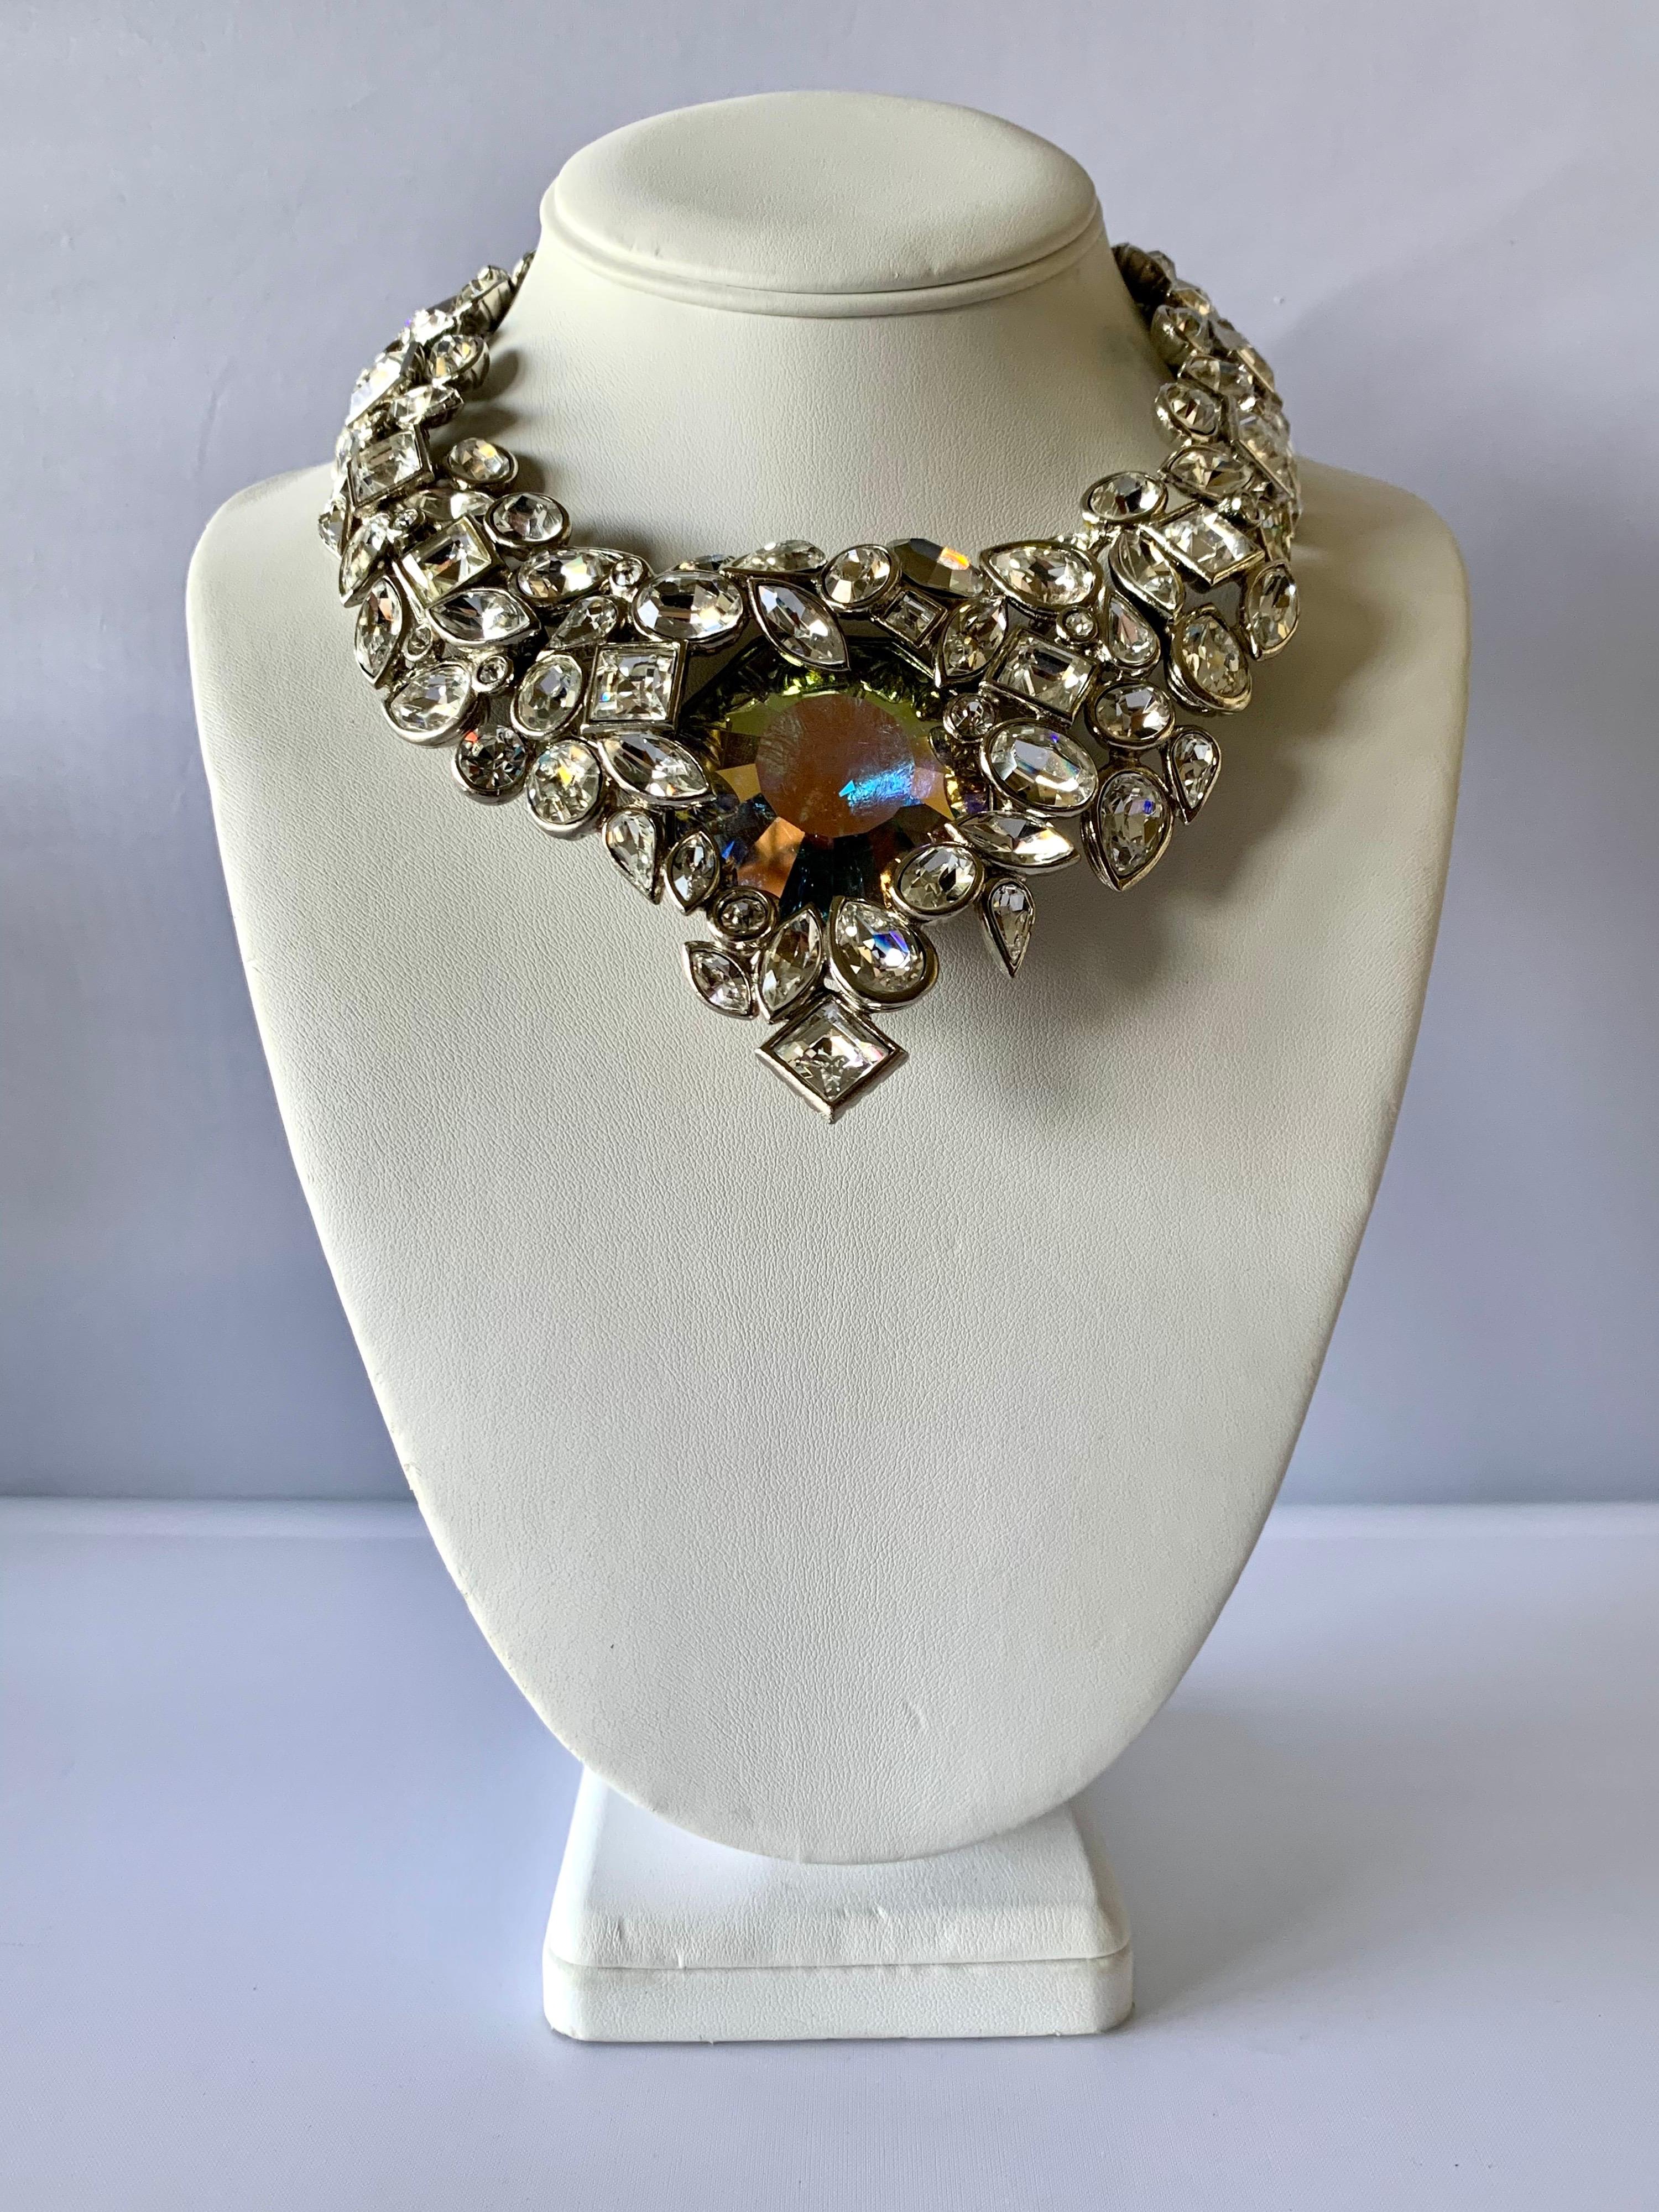 Scarce vintage Yves Saint Laurent jeweled diamante silver-tone statement necklace by Robert Goossens. The necklace features a striking yet intricate design with clear glass faceted cut stones - masterfully crafted by Maison Robert Goossens for Yves